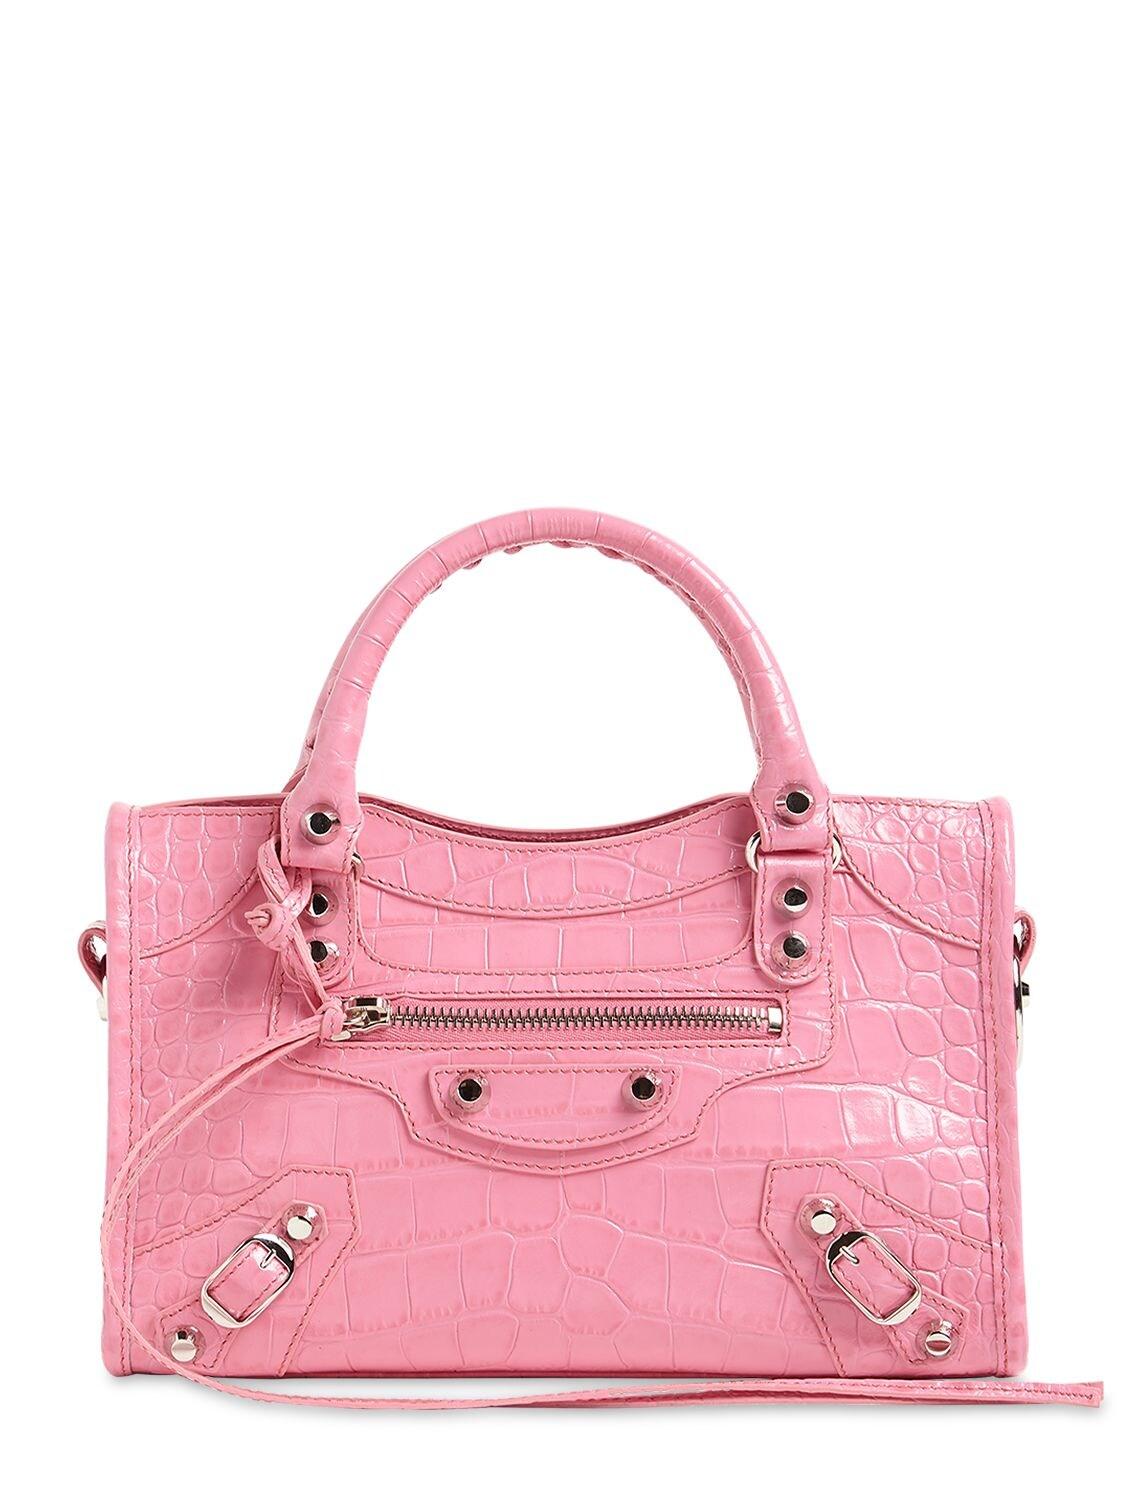 Balenciaga Classic City Mini Croc-embossed Leather Shoulder Bag in Pink |  Lyst